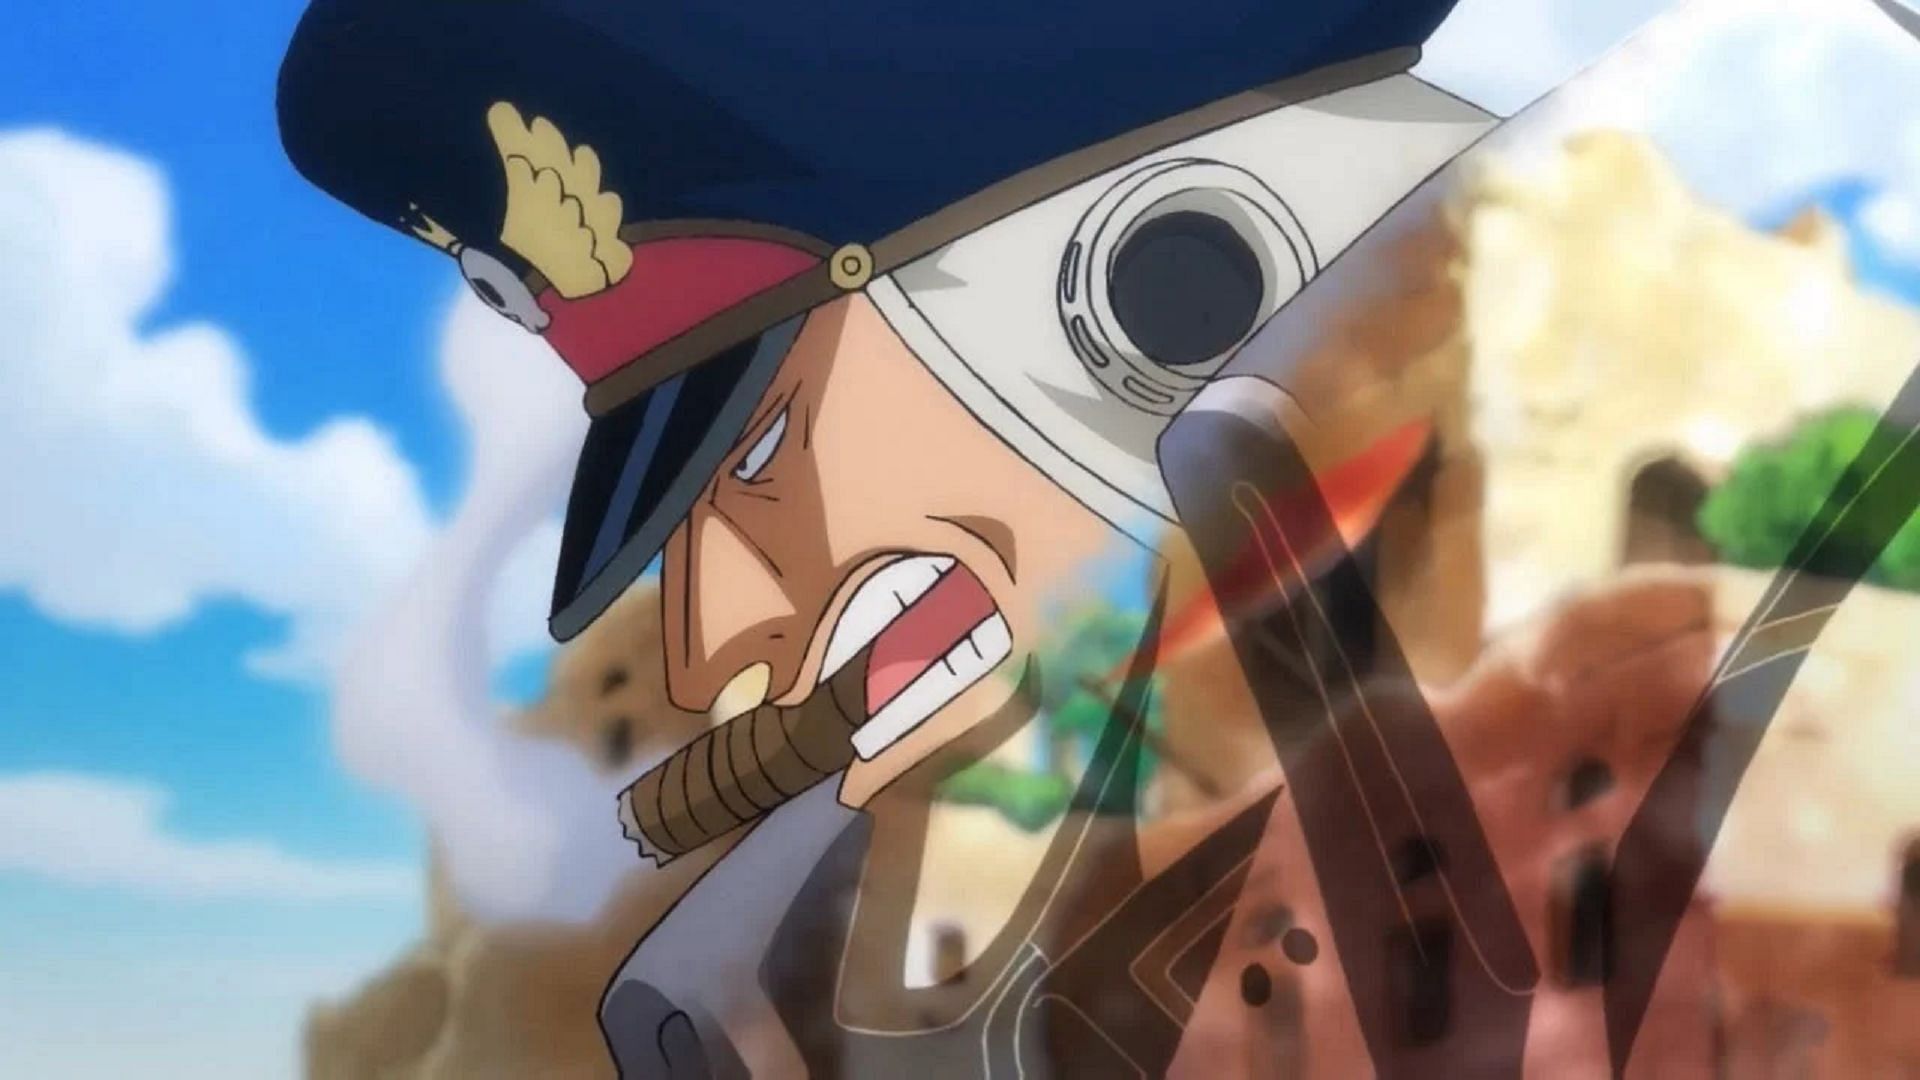 The Clear-Clear Fruit makes Shiryu even more dangerous (Image via Toei Animation, One Piece)